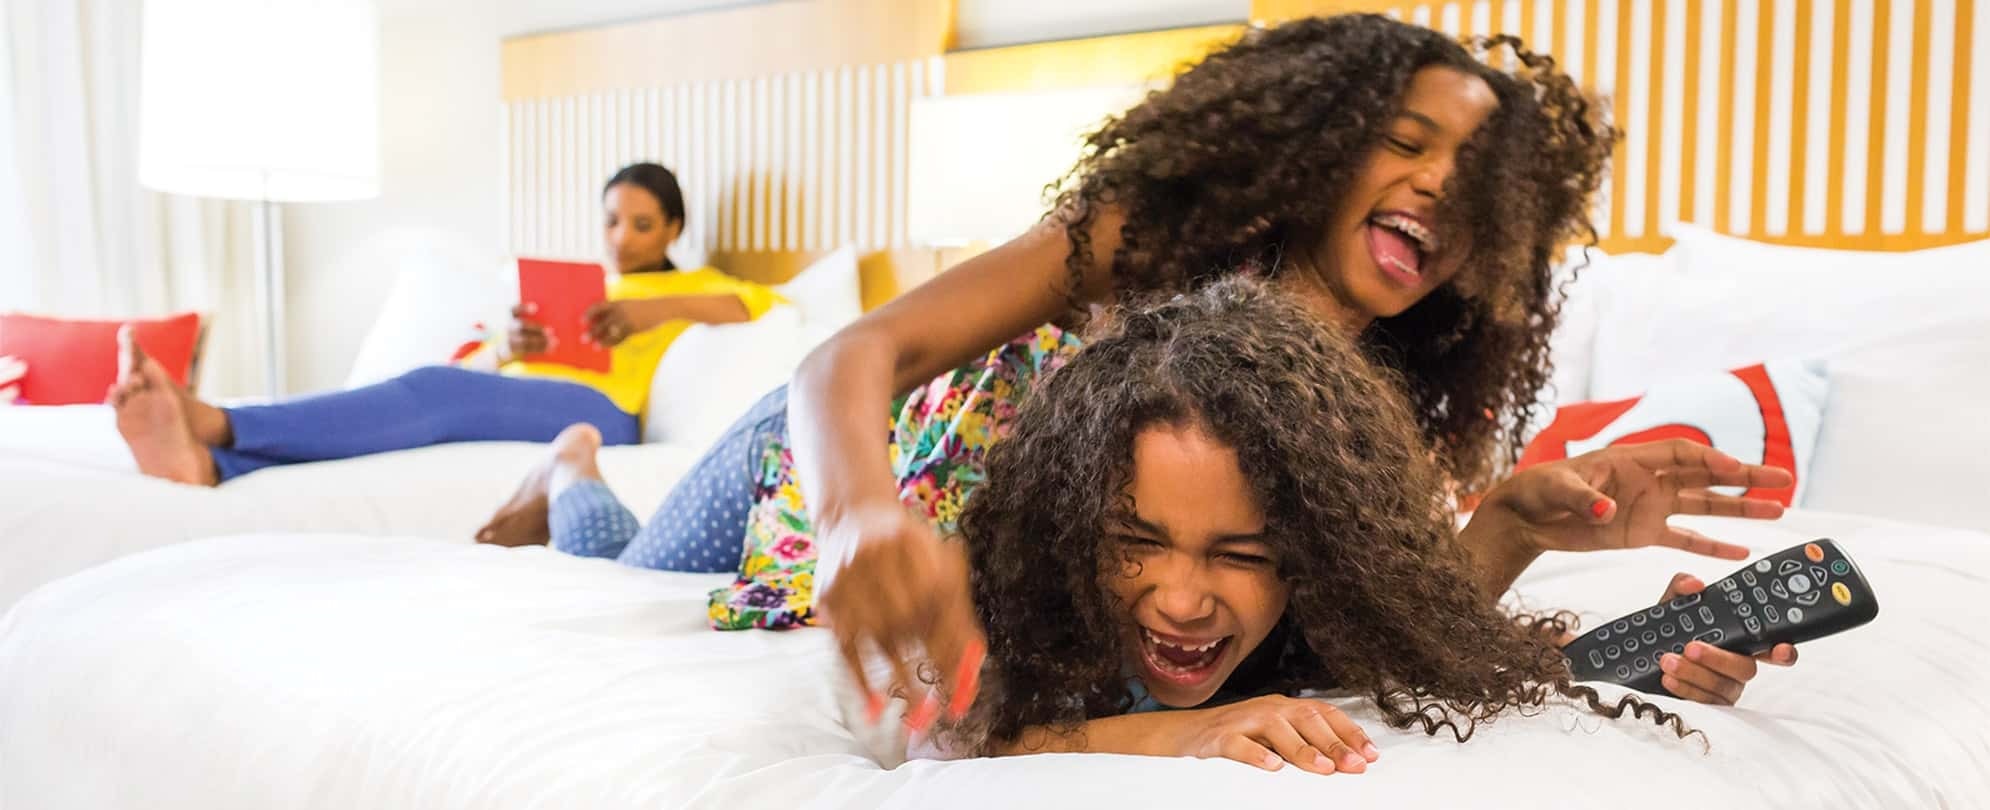 Two smiling young girls with dark, curly hair wrestle for remote on the bed of a Margaritaville Vacation Club Resort suite.